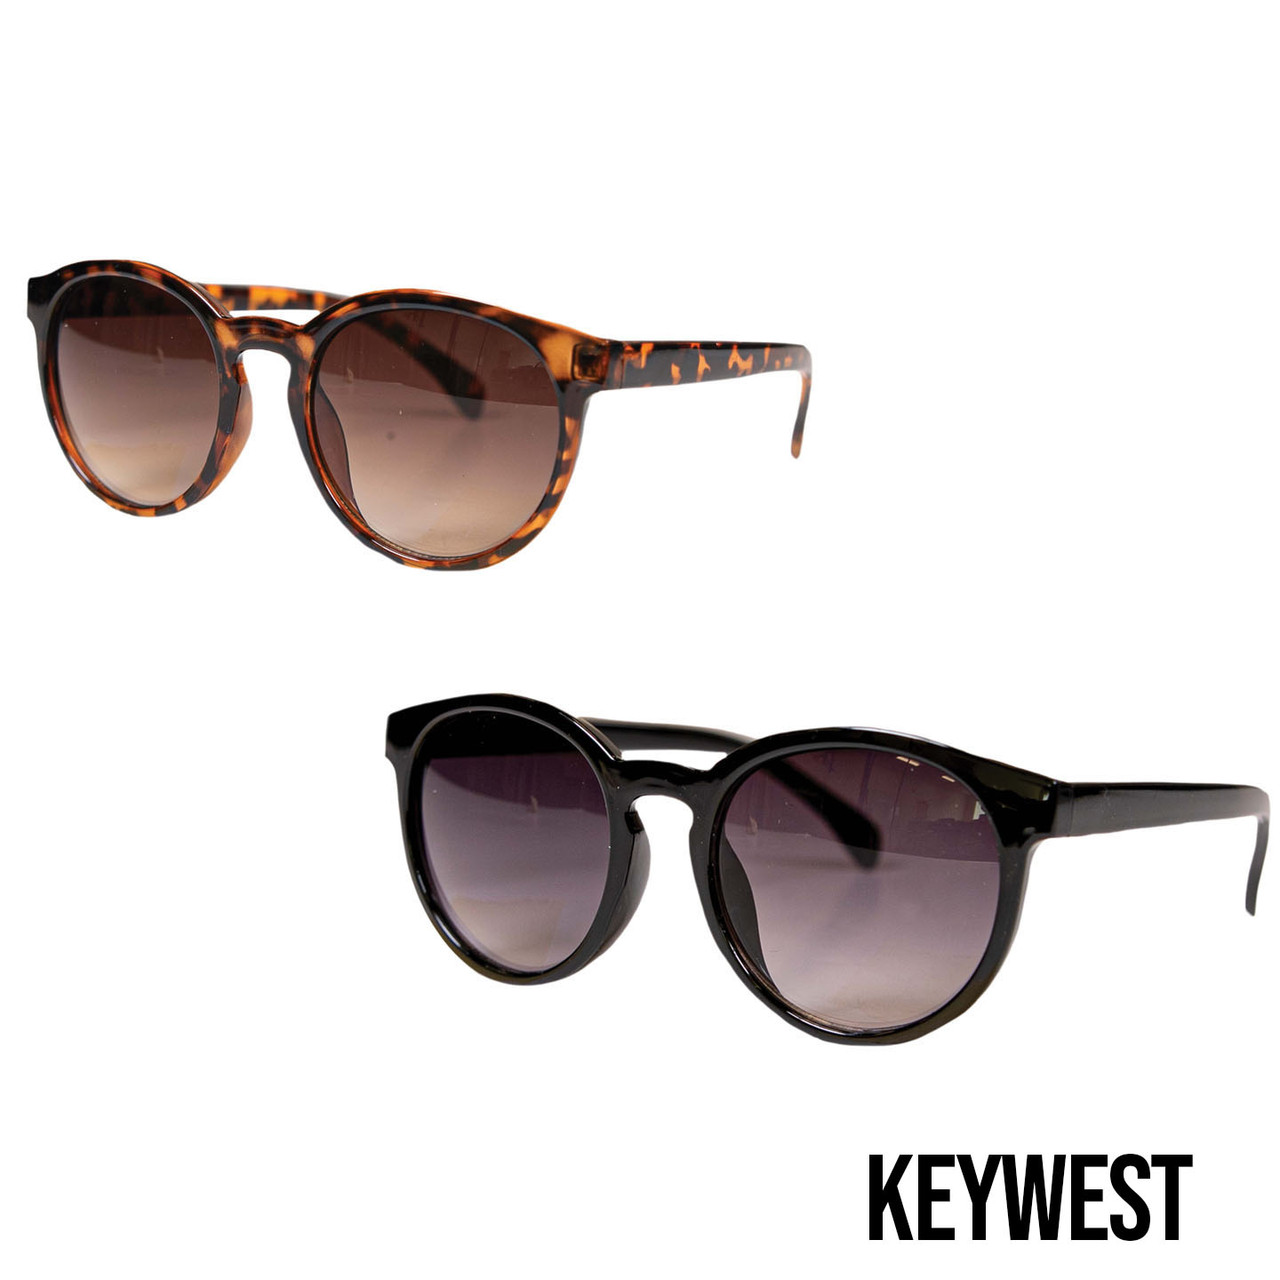 https://cdn11.bigcommerce.com/s-mdle1ql08i/images/stencil/1280x1280/products/7063/10336/simply-southern-sunglasses-keywest-key-west__14799.1646455351.jpg?c=2?imbypass=on